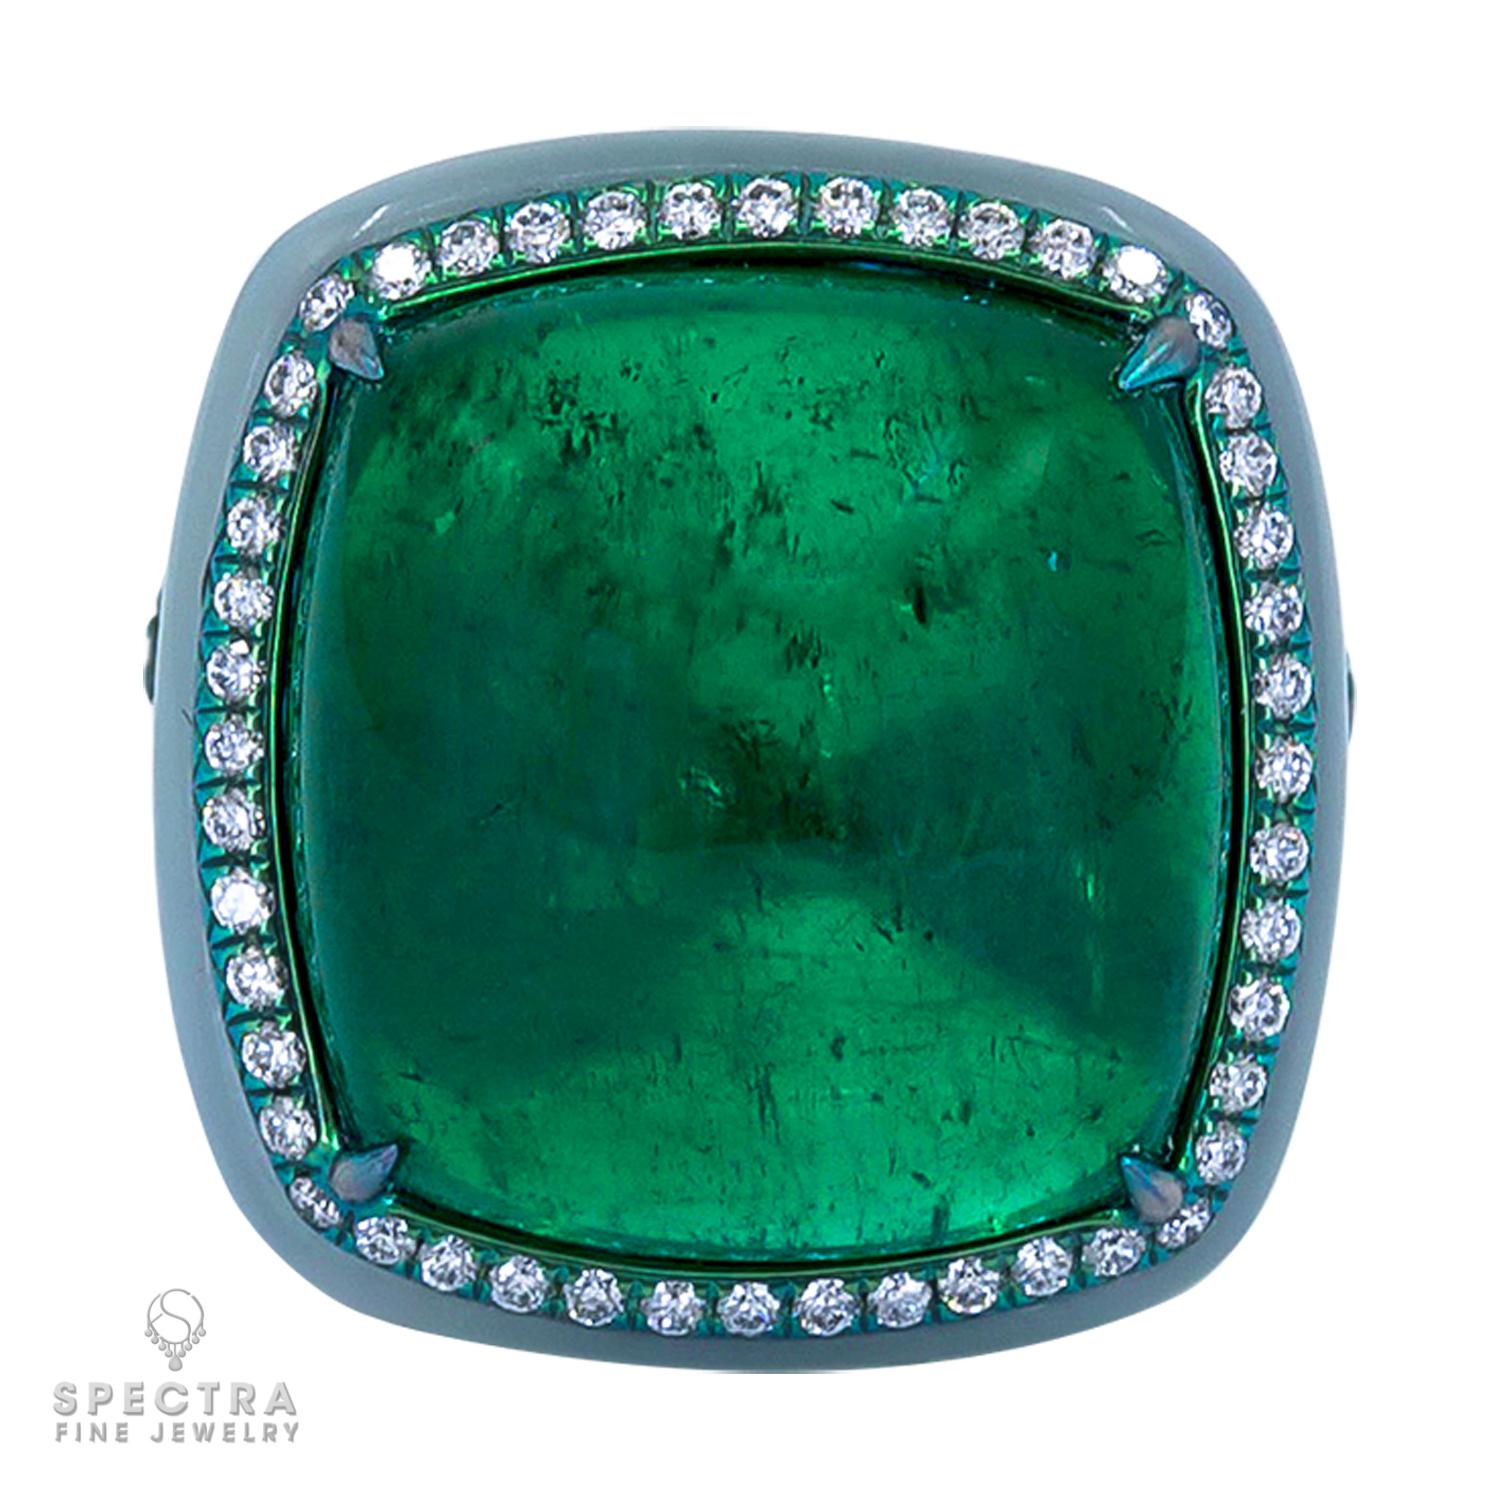 Contemporary Spectra Fine Jewelry GRS Certified 17.76 Carat Colombian Emerald Diamond Ring For Sale